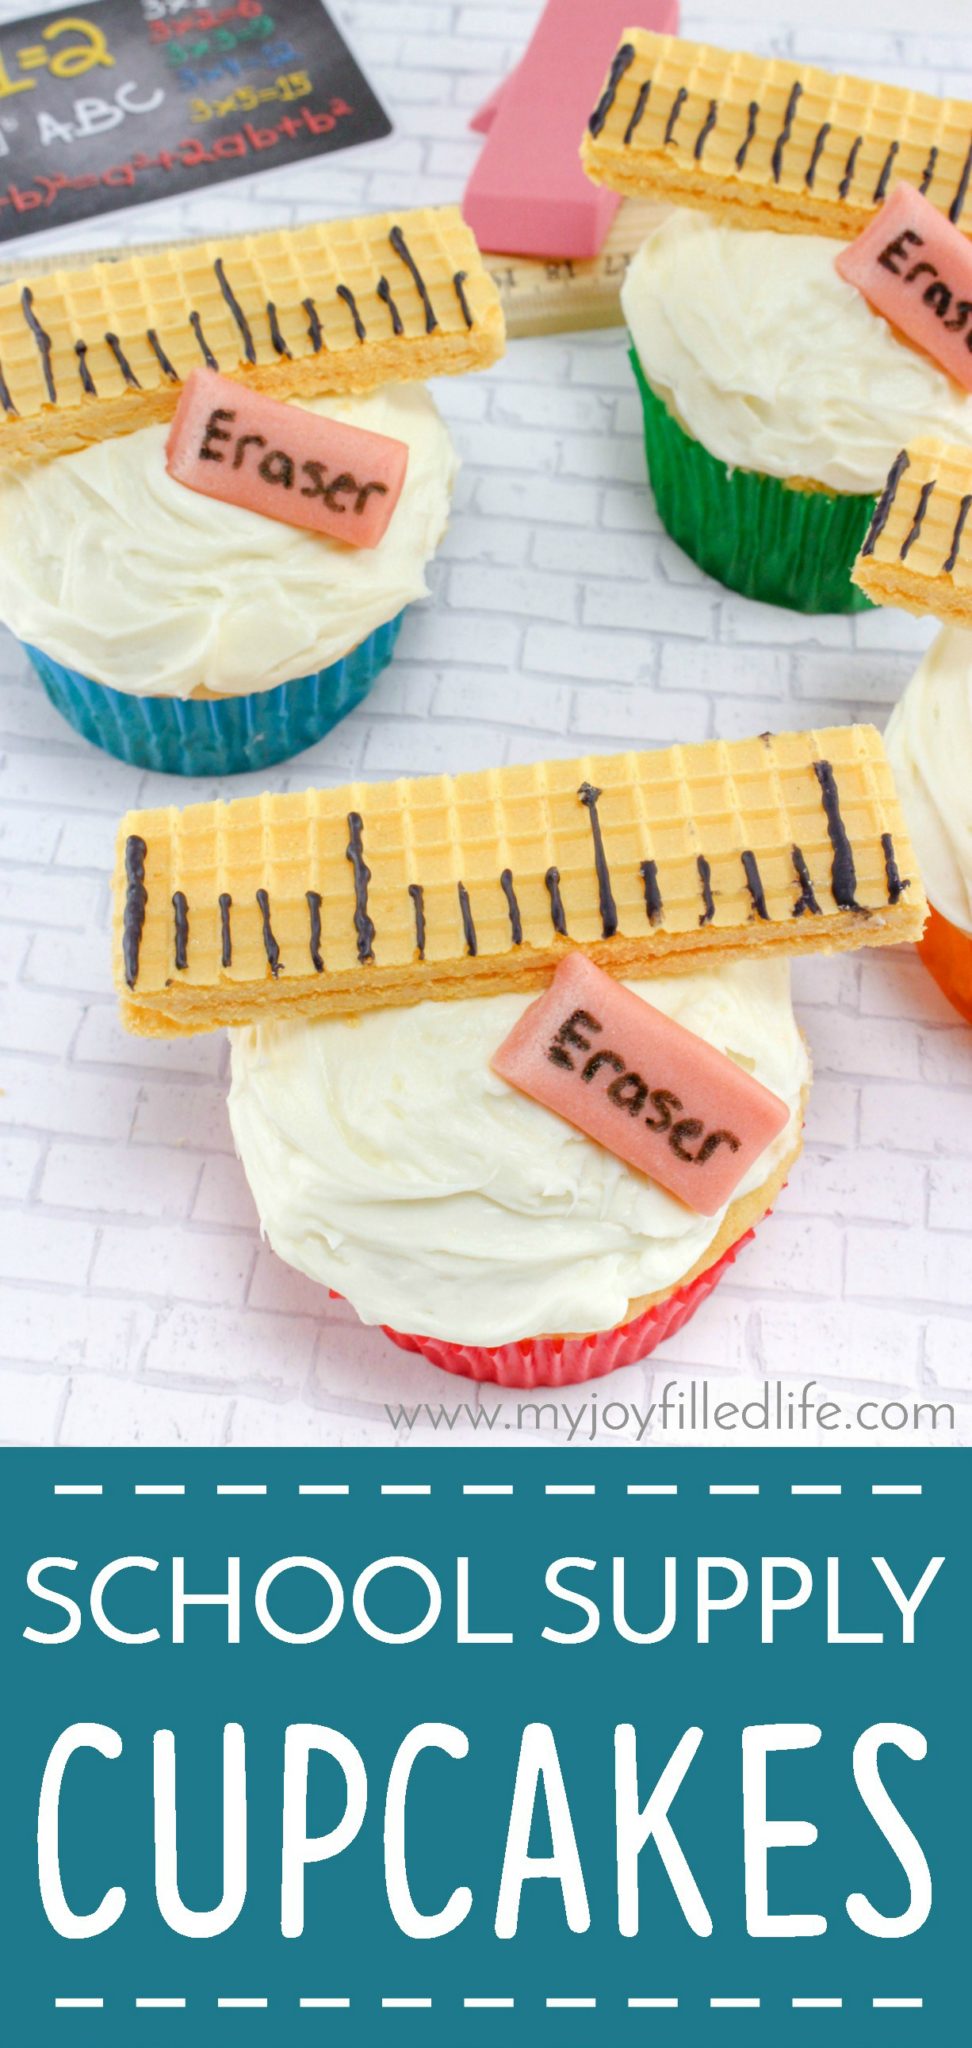 These cupcakes are perfect for your back-to-school party or celebration! #backtoschool #cupcakes